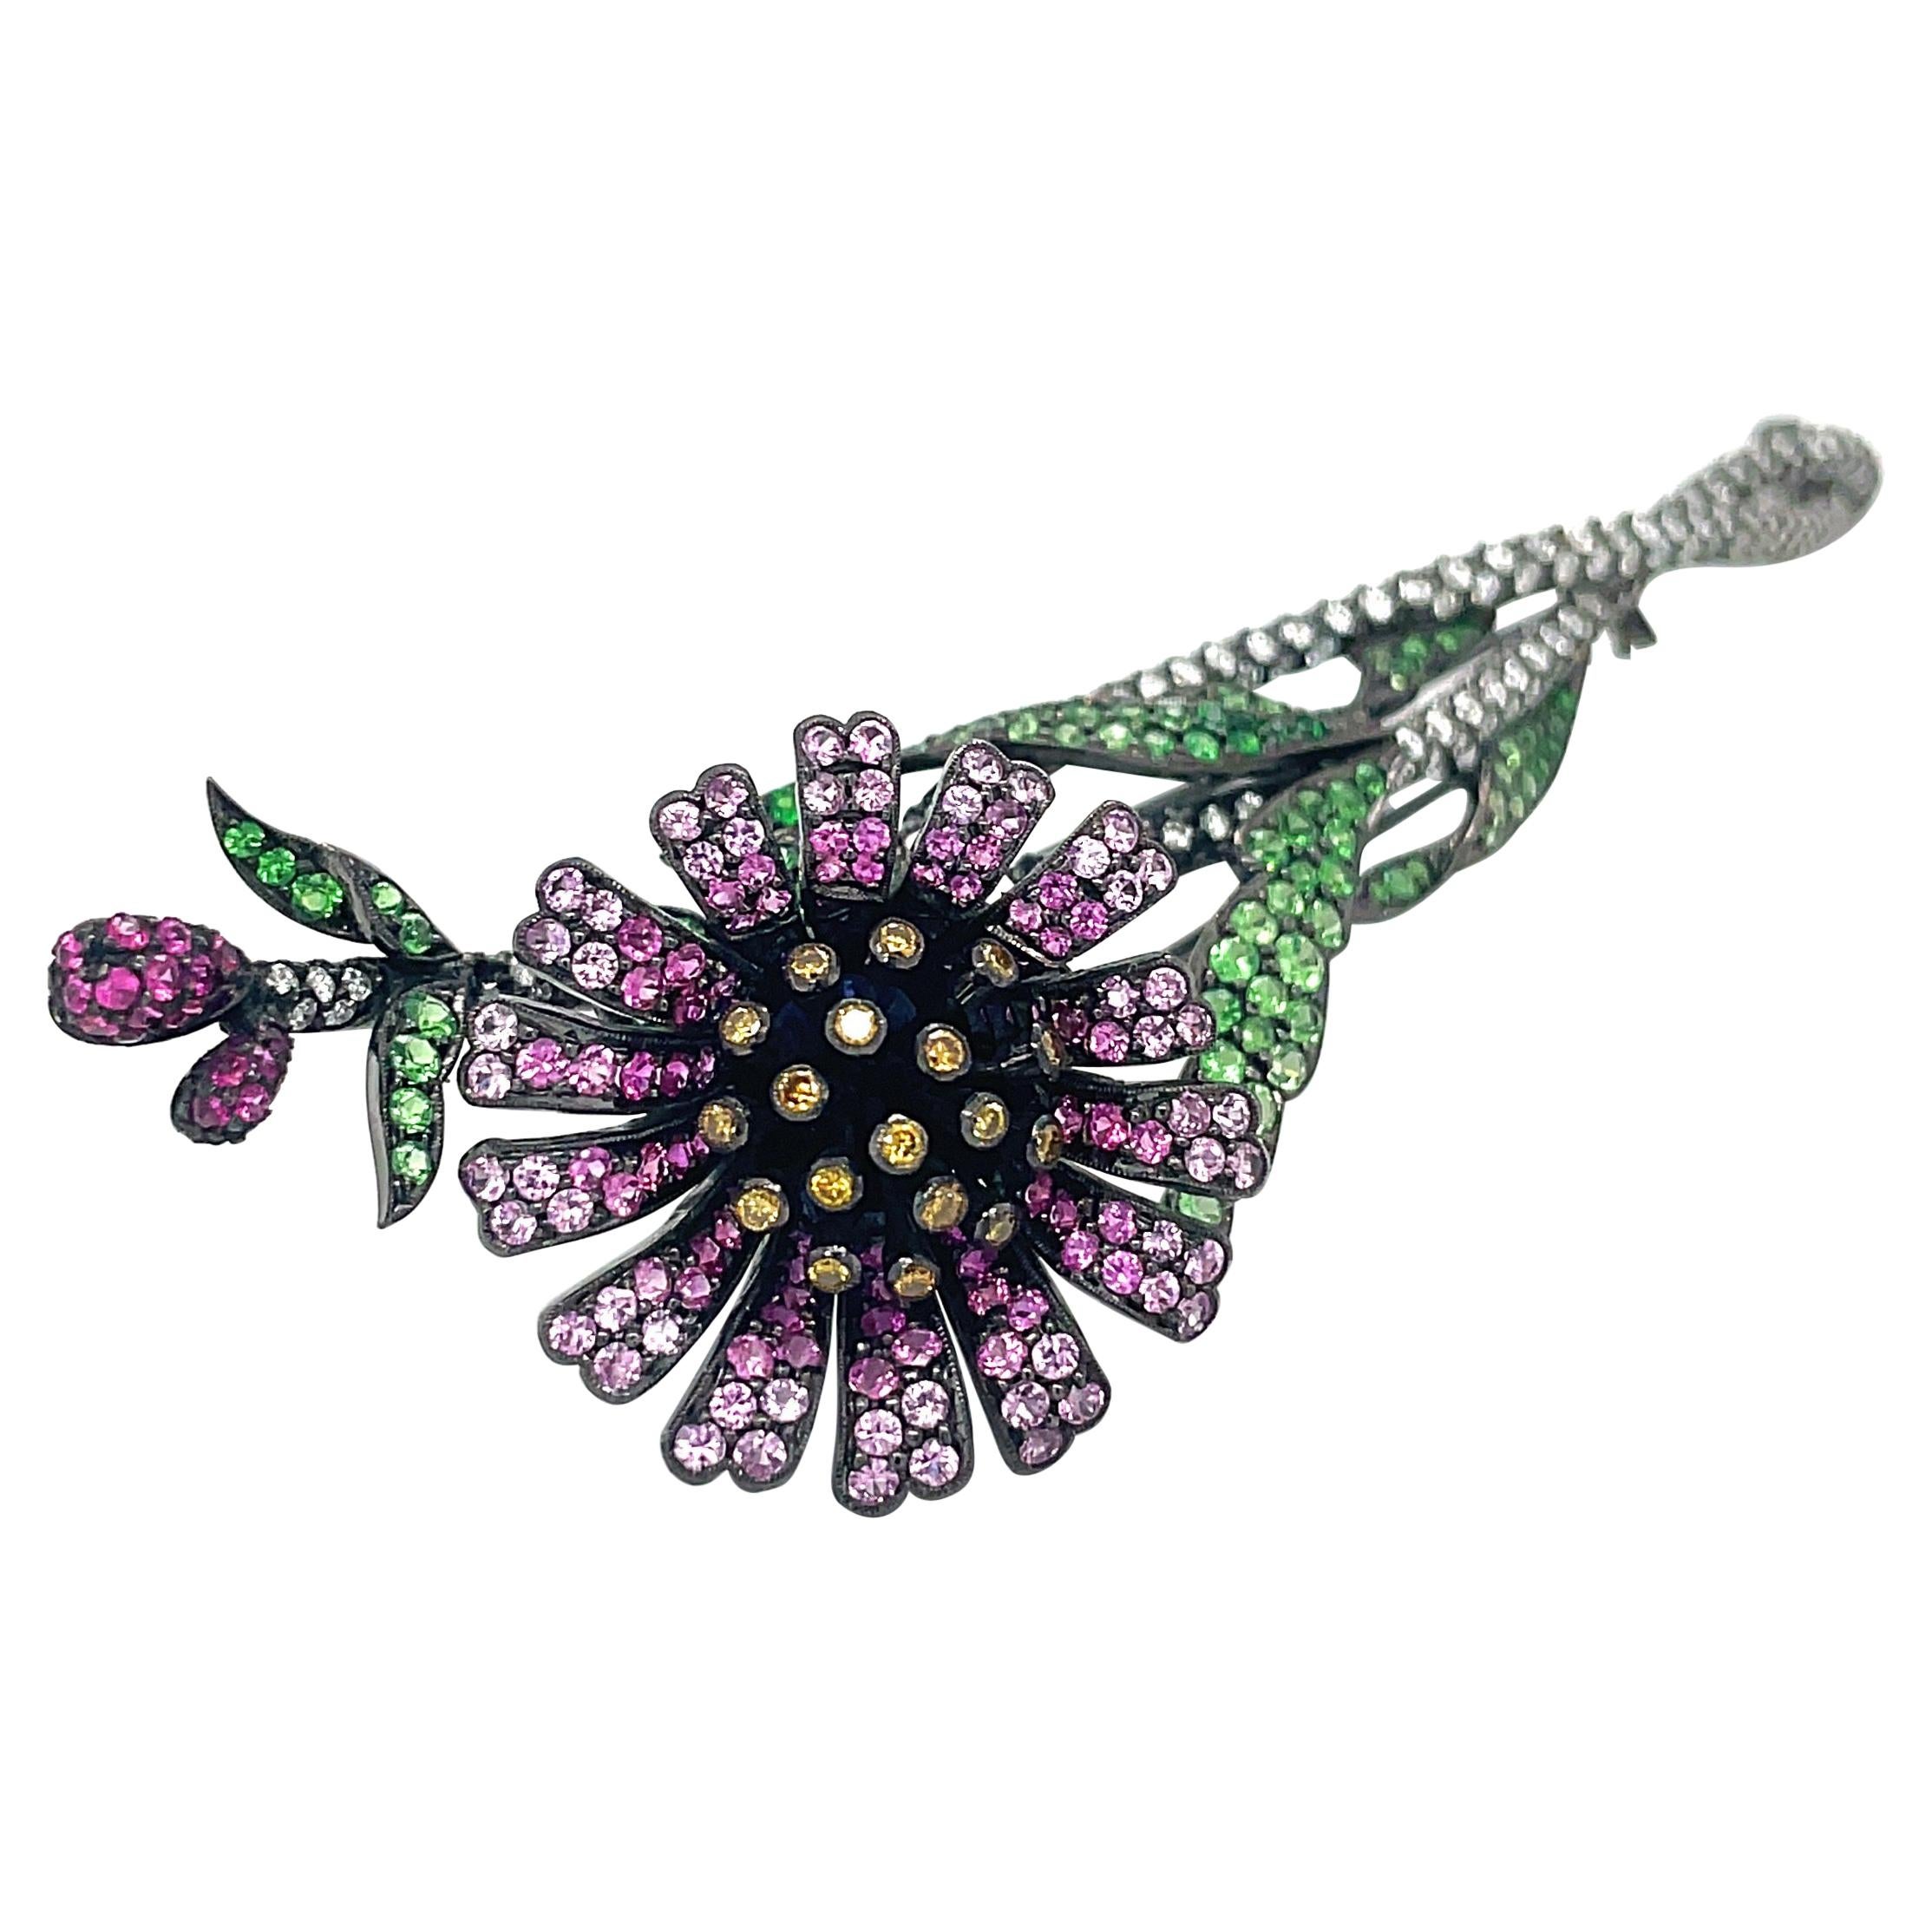 Blackened 18kt Gold Flower Brooch with Diamonds, Pink Sapphires and Tsavorite